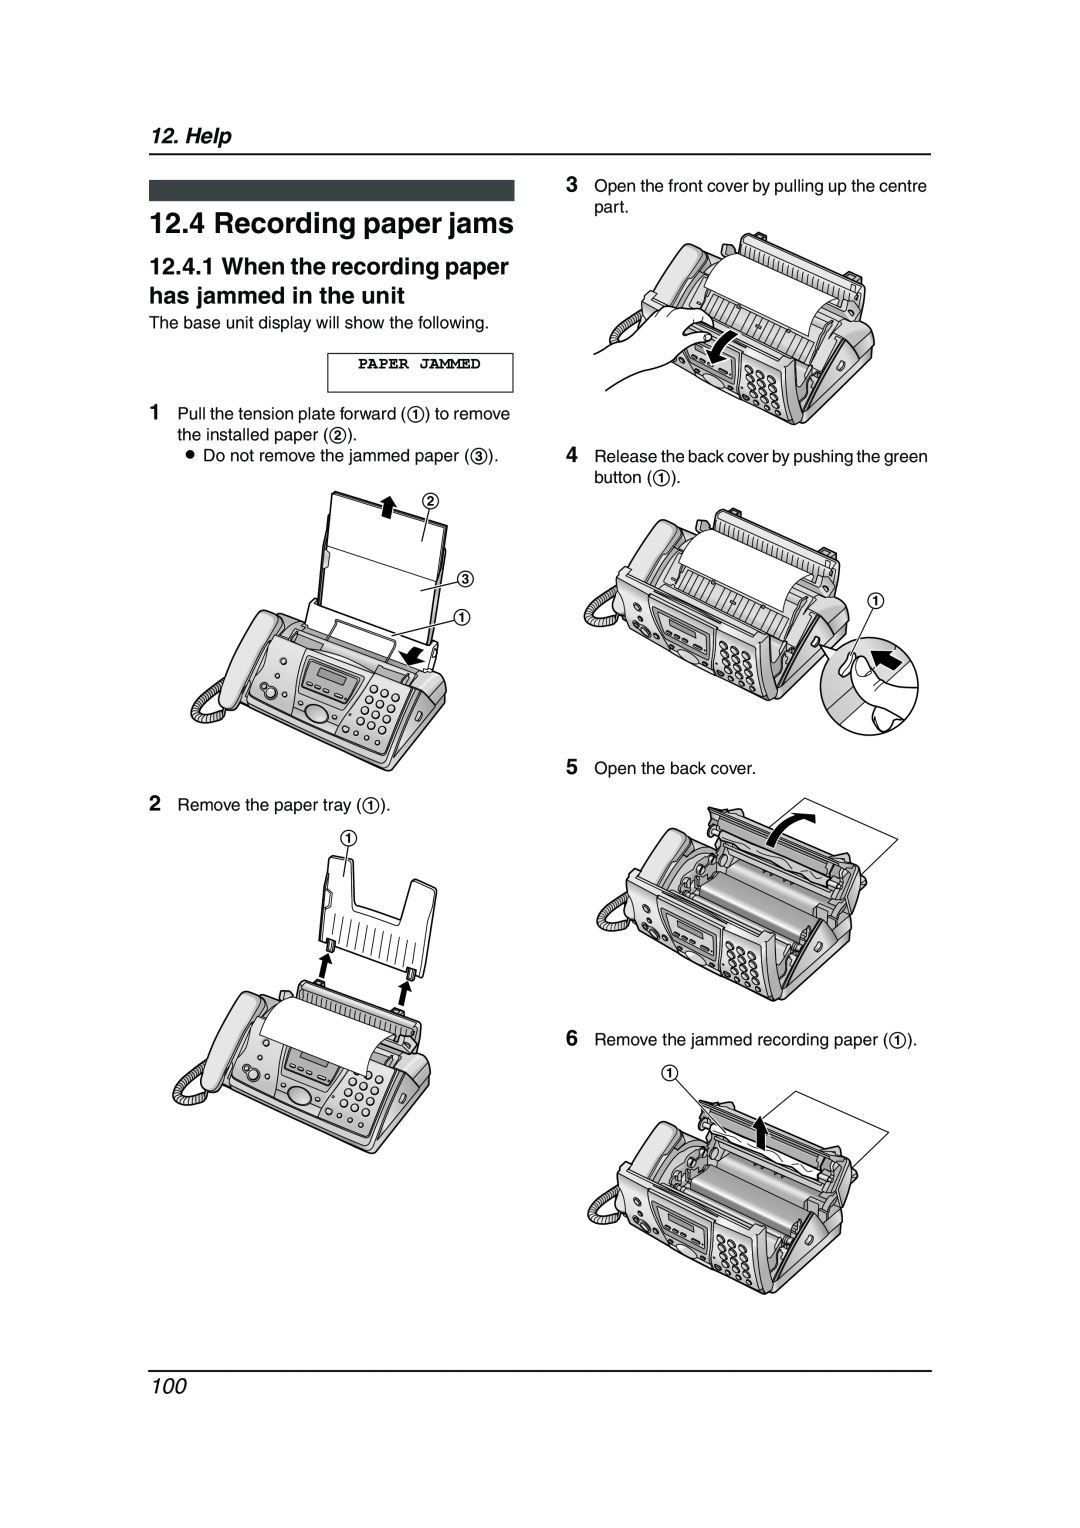 Panasonic KX-FC241AL manual Recording paper jams, When the recording paper has jammed in the unit, Help 